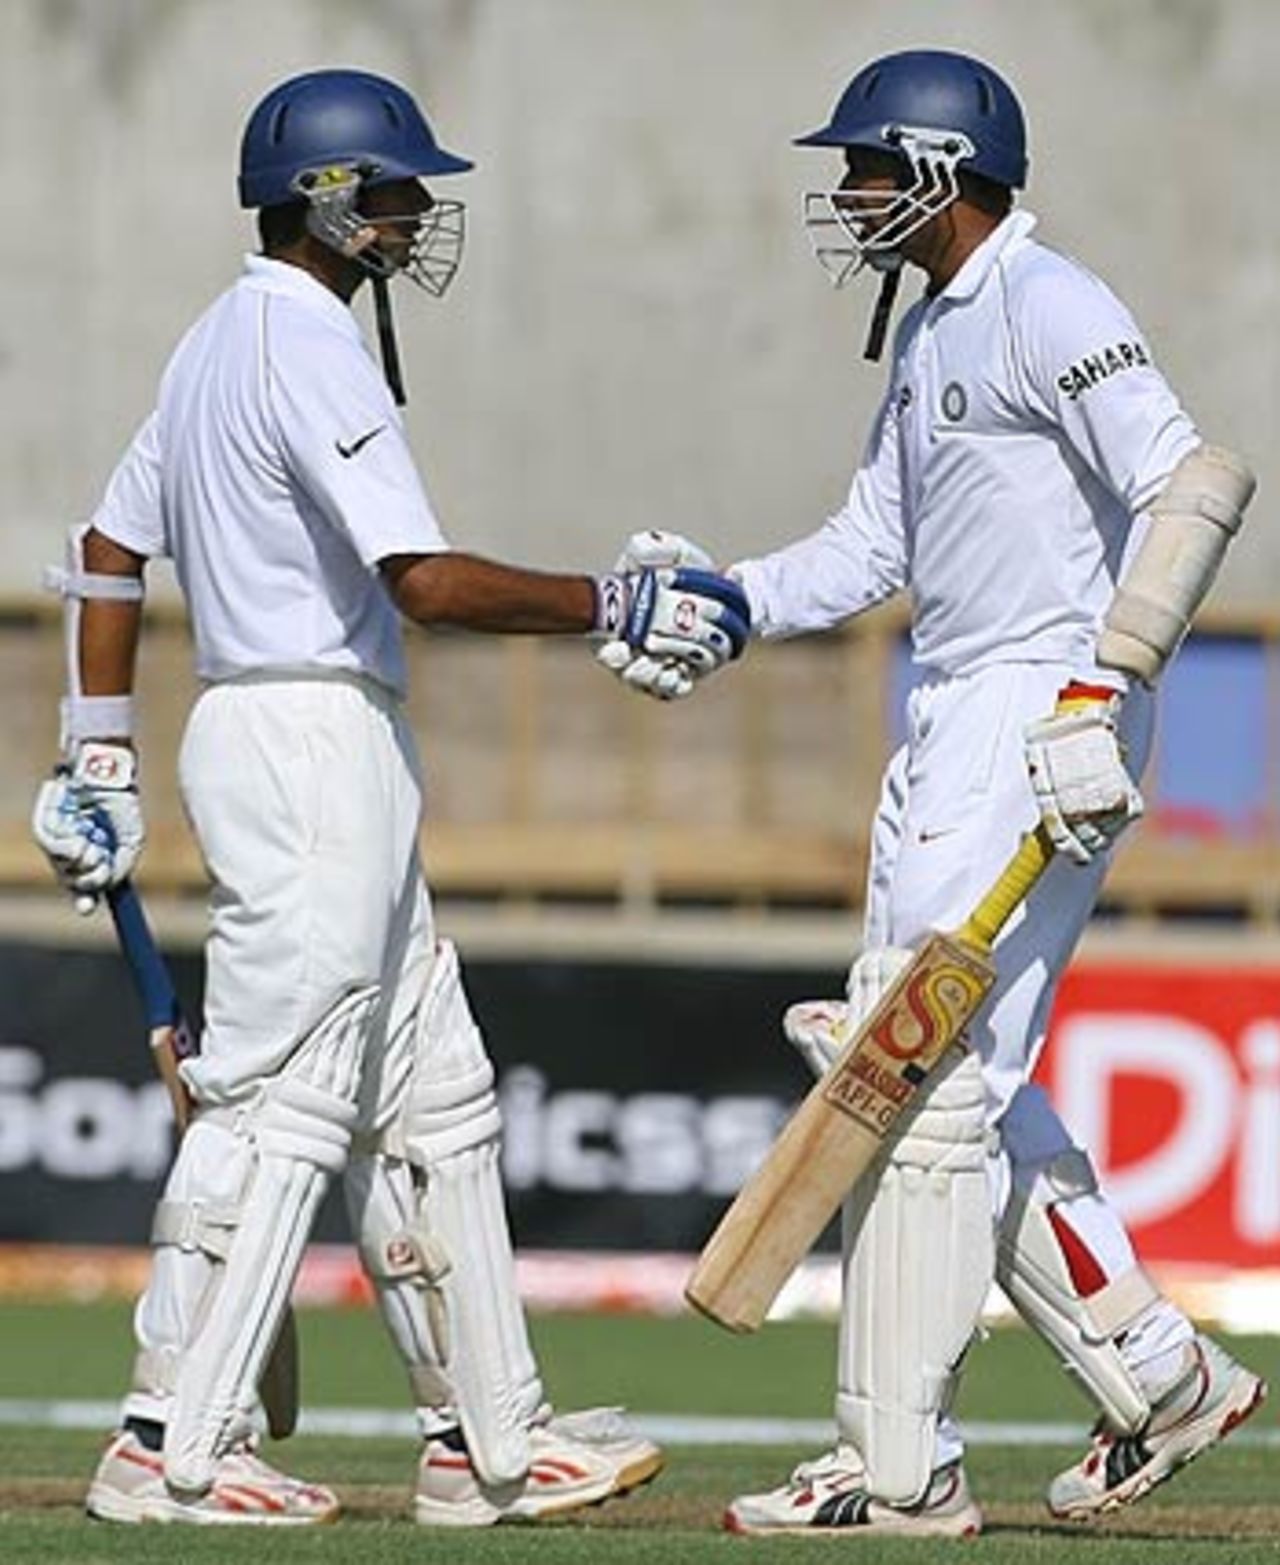 Rahul Dravid and Anil Kumble added 93 runs for the seventh wicket, West Indies v India, 4th Test, Jamaica, 1st day, June 30, 2006